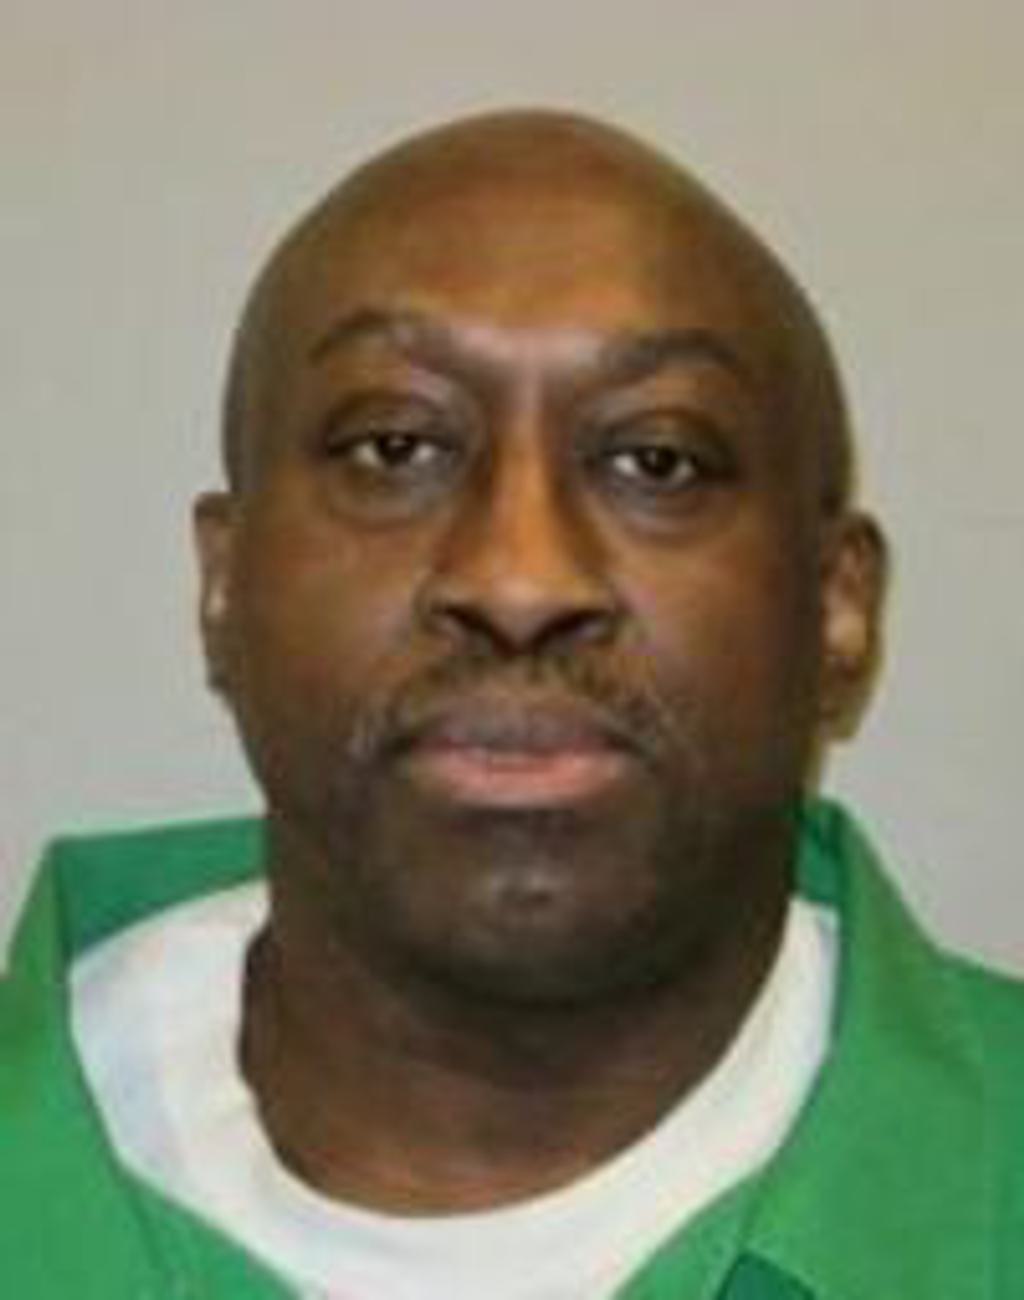 Taken Off Death Row in 2014, Intellectually Disabled South Carolina Man Now Gets New Trial